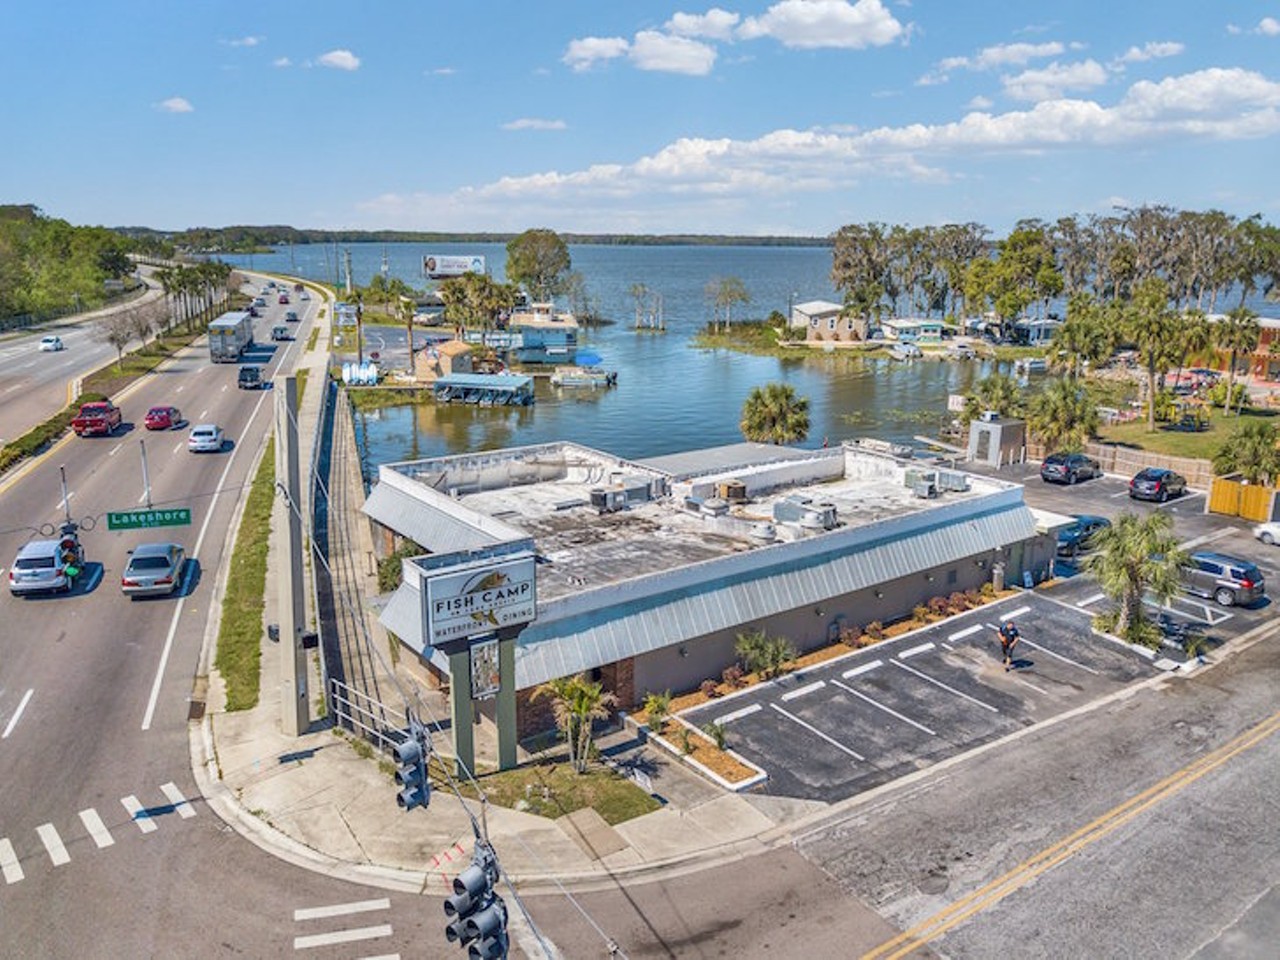 Fish Camp on Lake Eustis
901 Lake Shore Blvd., Tavares, 352-742-4400
Lakeside dining with a bounty of seafood (and turf to go with your surf) and craft beers from this old-fashioned restaurant.
Photo via Fish Camp on Lake Eustis/FB